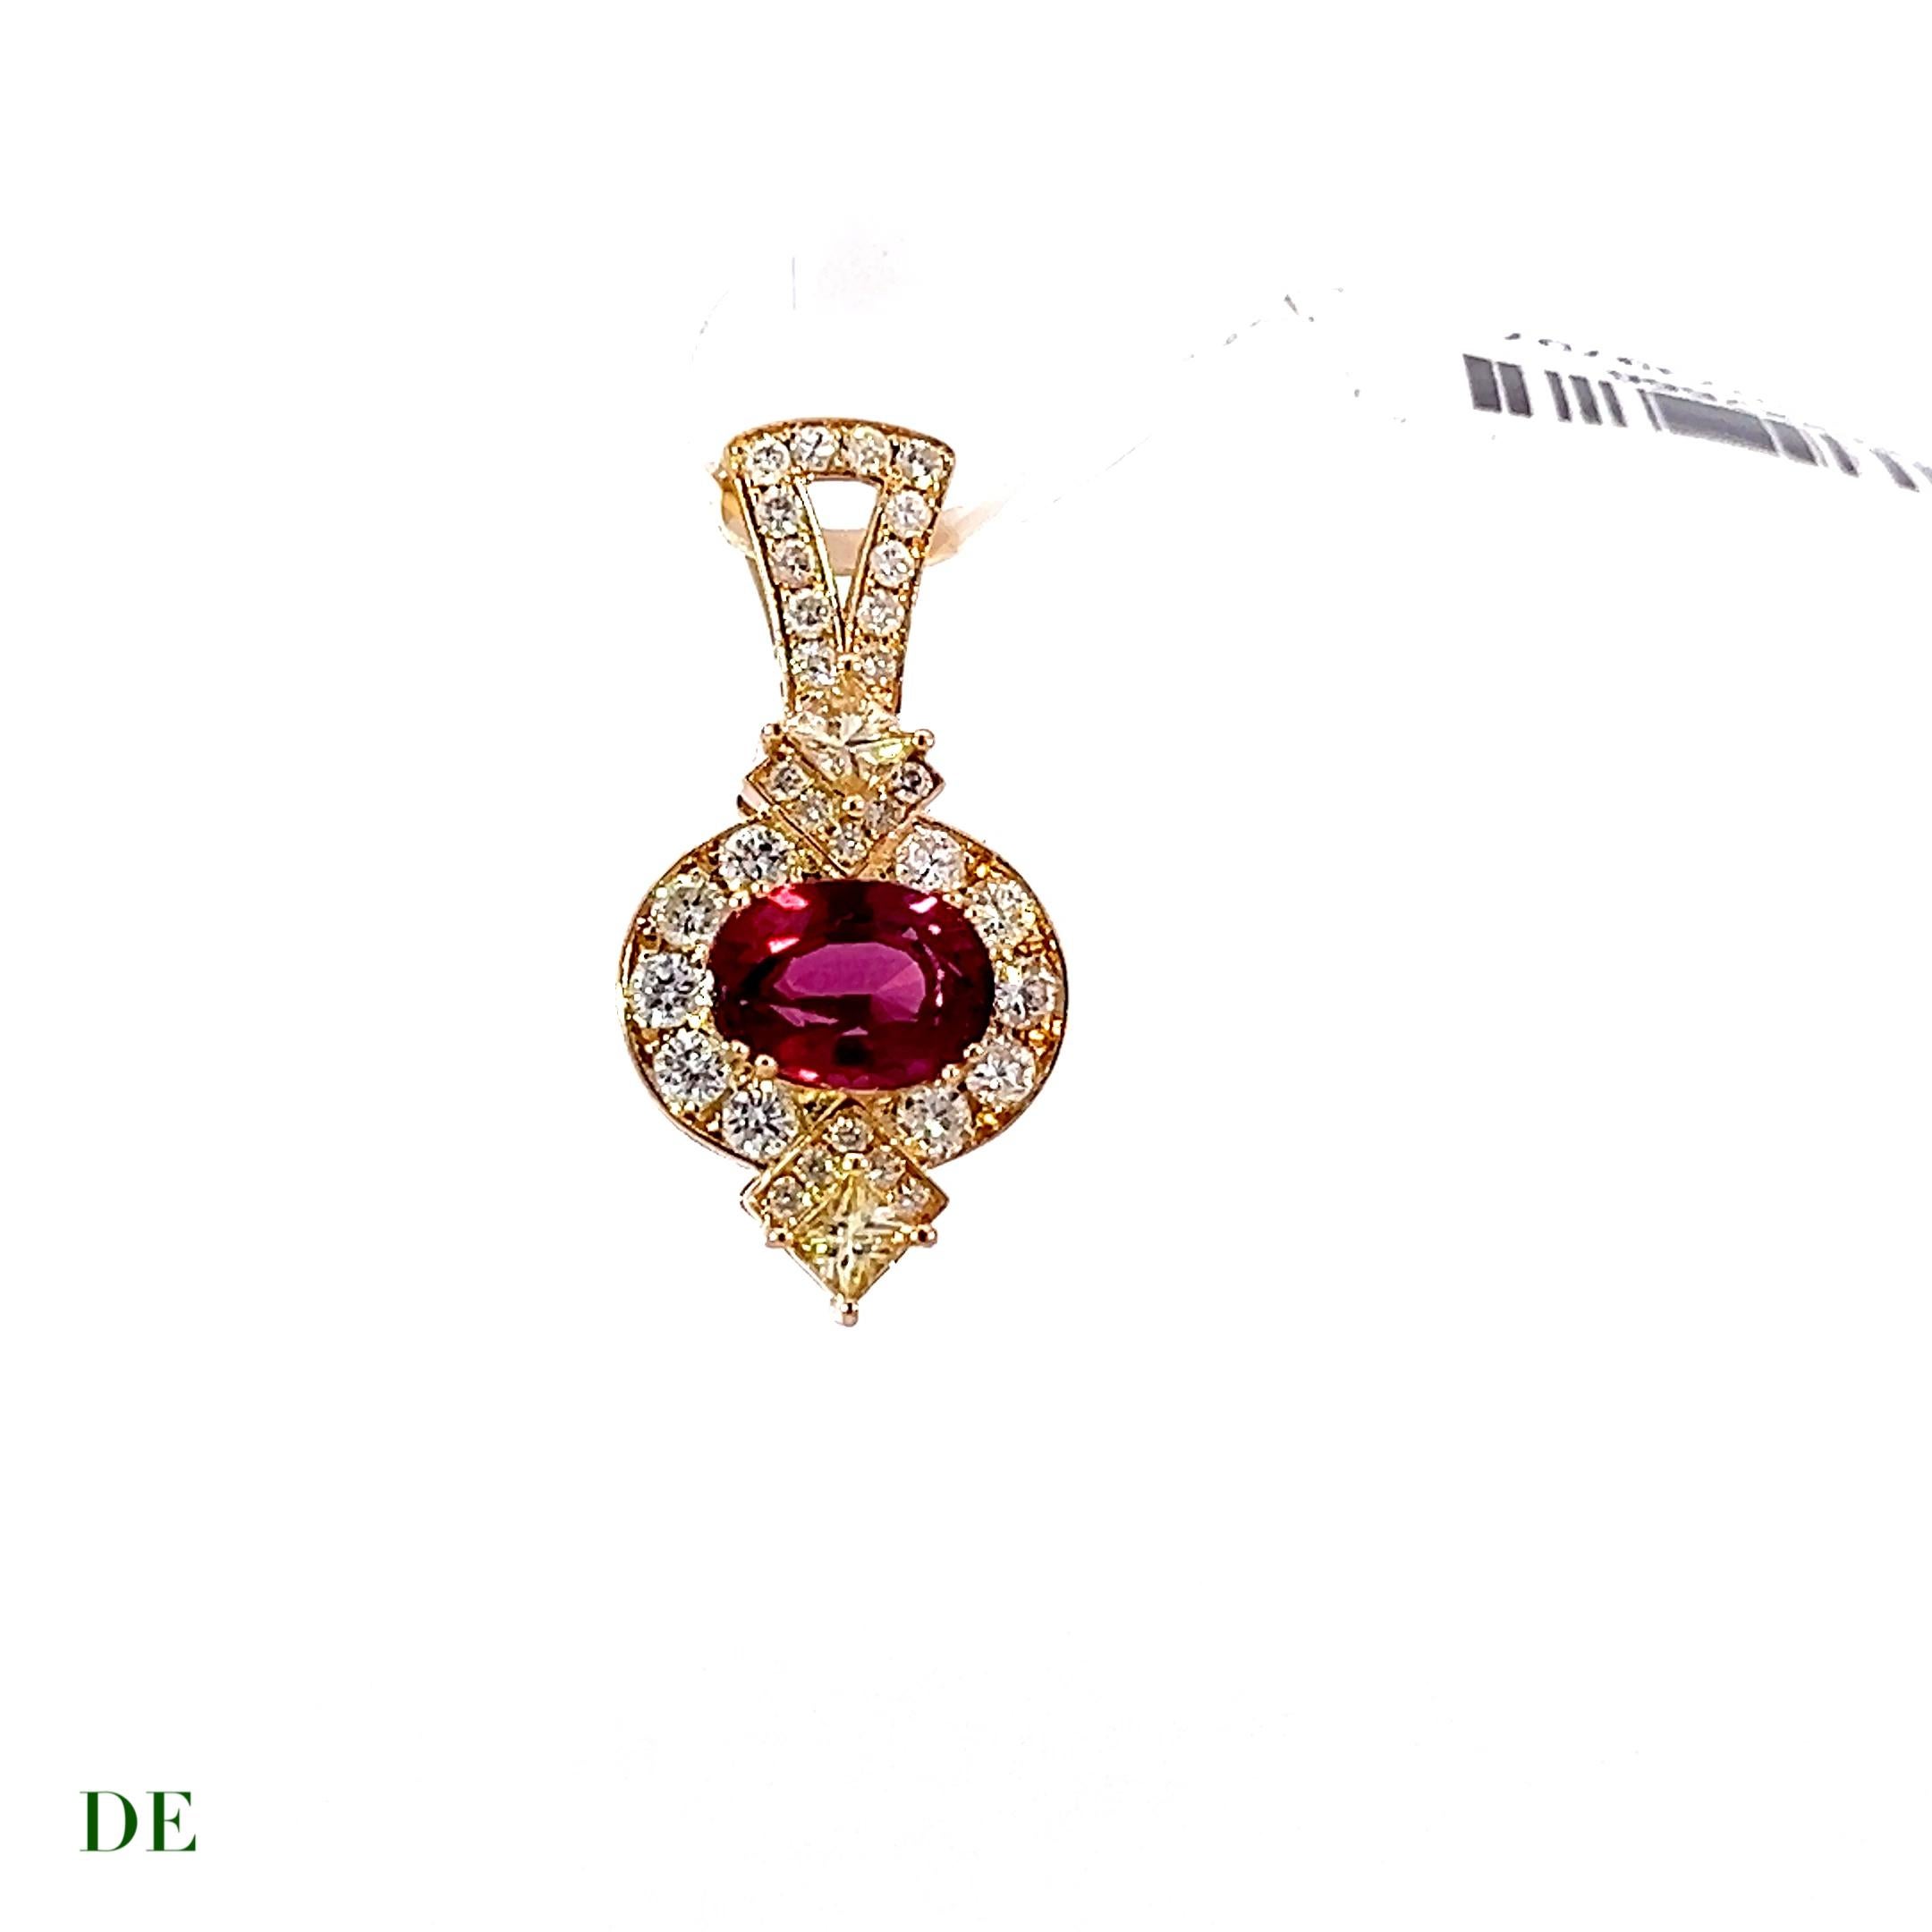 Pear Cut Limited Classic 14k Gold w/ 1.5 ct reddish burgundy spinel .62ct Diamond Pendant For Sale